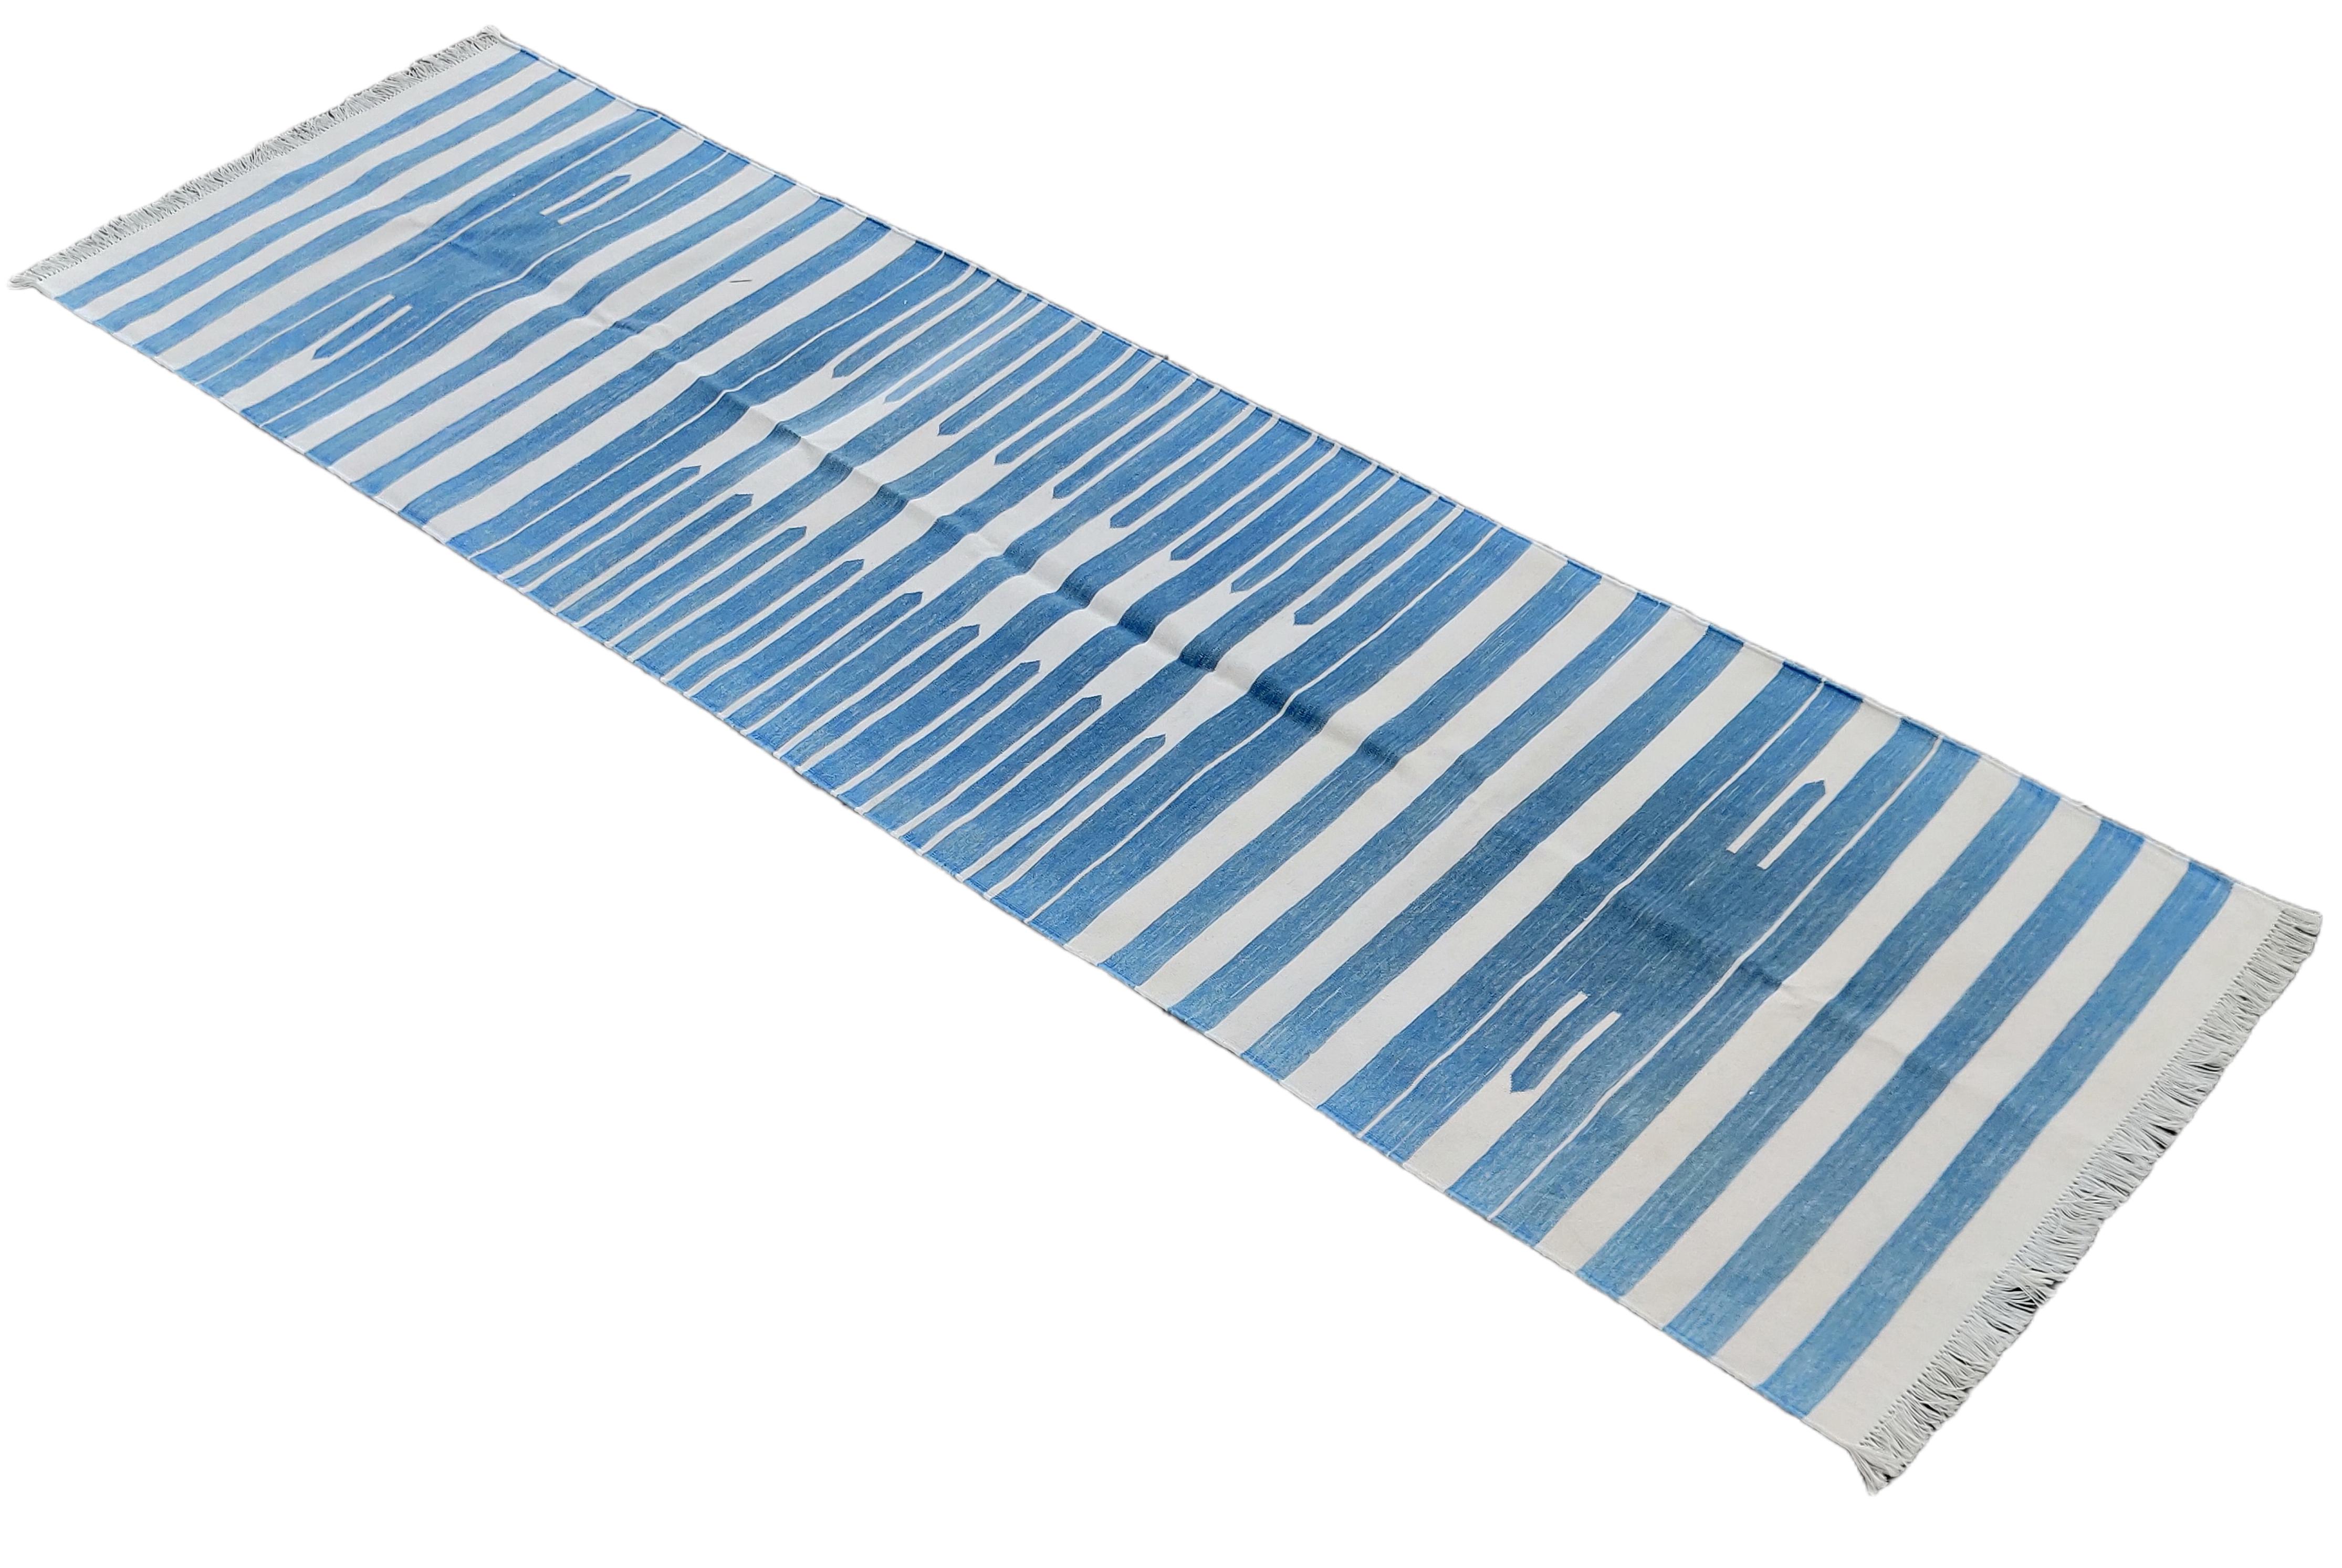 Cotton Natural Vegetable Dyed, Blue And White Striped Indian Dhurrie Runner-3'x8'
These special flat-weave dhurries are hand-woven with 15 ply 100% cotton yarn. Due to the special manufacturing techniques used to create our rugs, the size and color